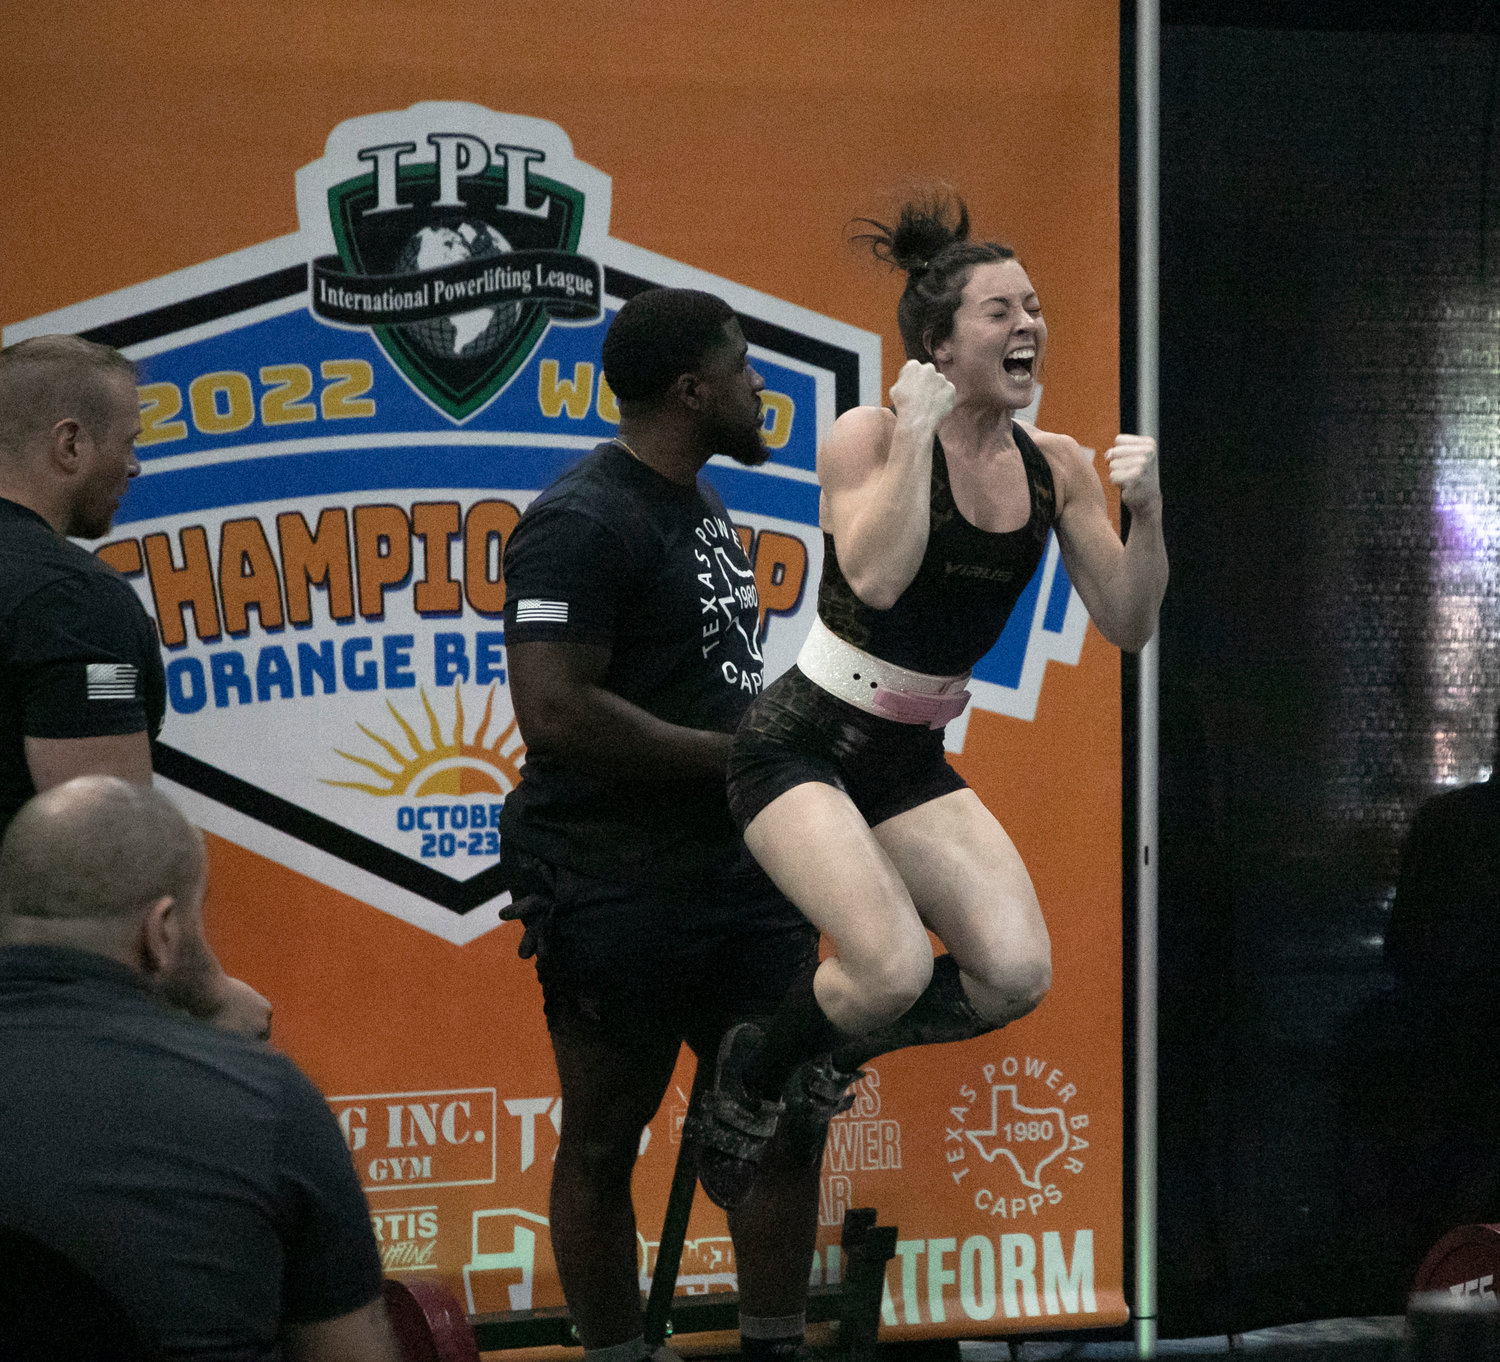 Heather Grimes celebrates her final-attempt clearance on the deadlift of 303.1 pounds (137.5 kg) at the IPL World Championship meet at the Orange Beach Event Center Oct. 20.